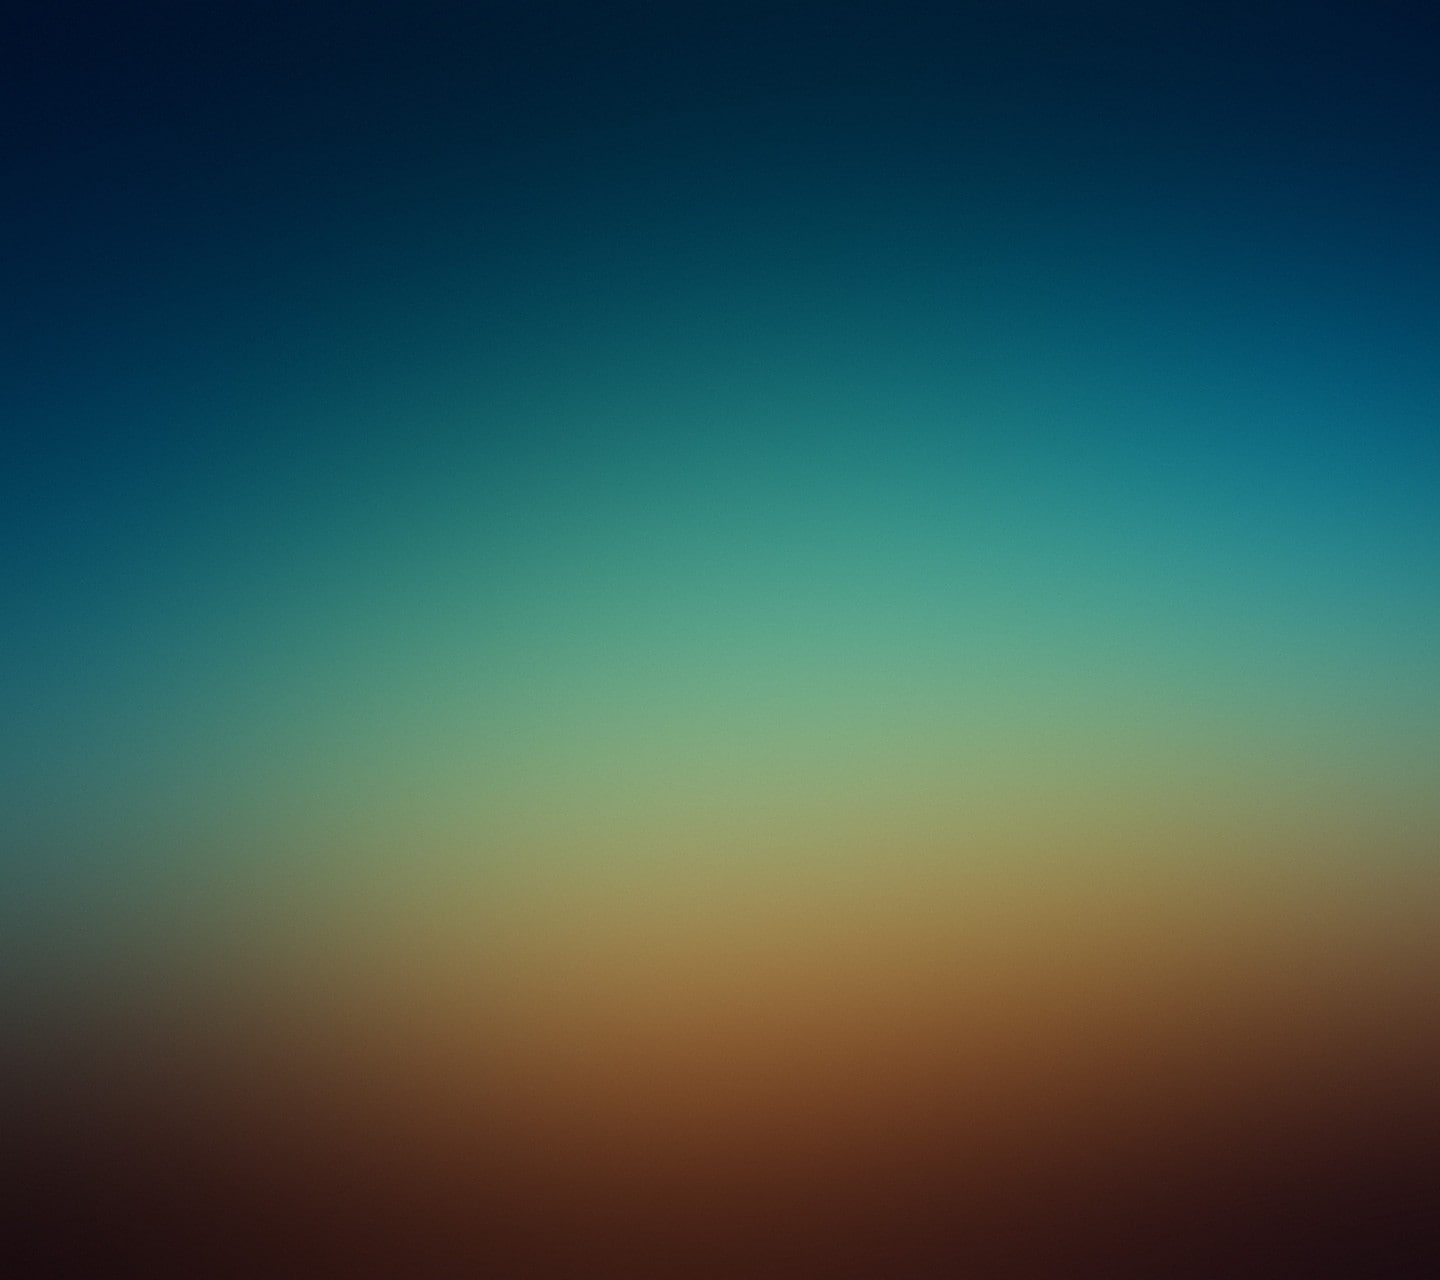 simple, digital art, backgrounds, abstract, no people, blue